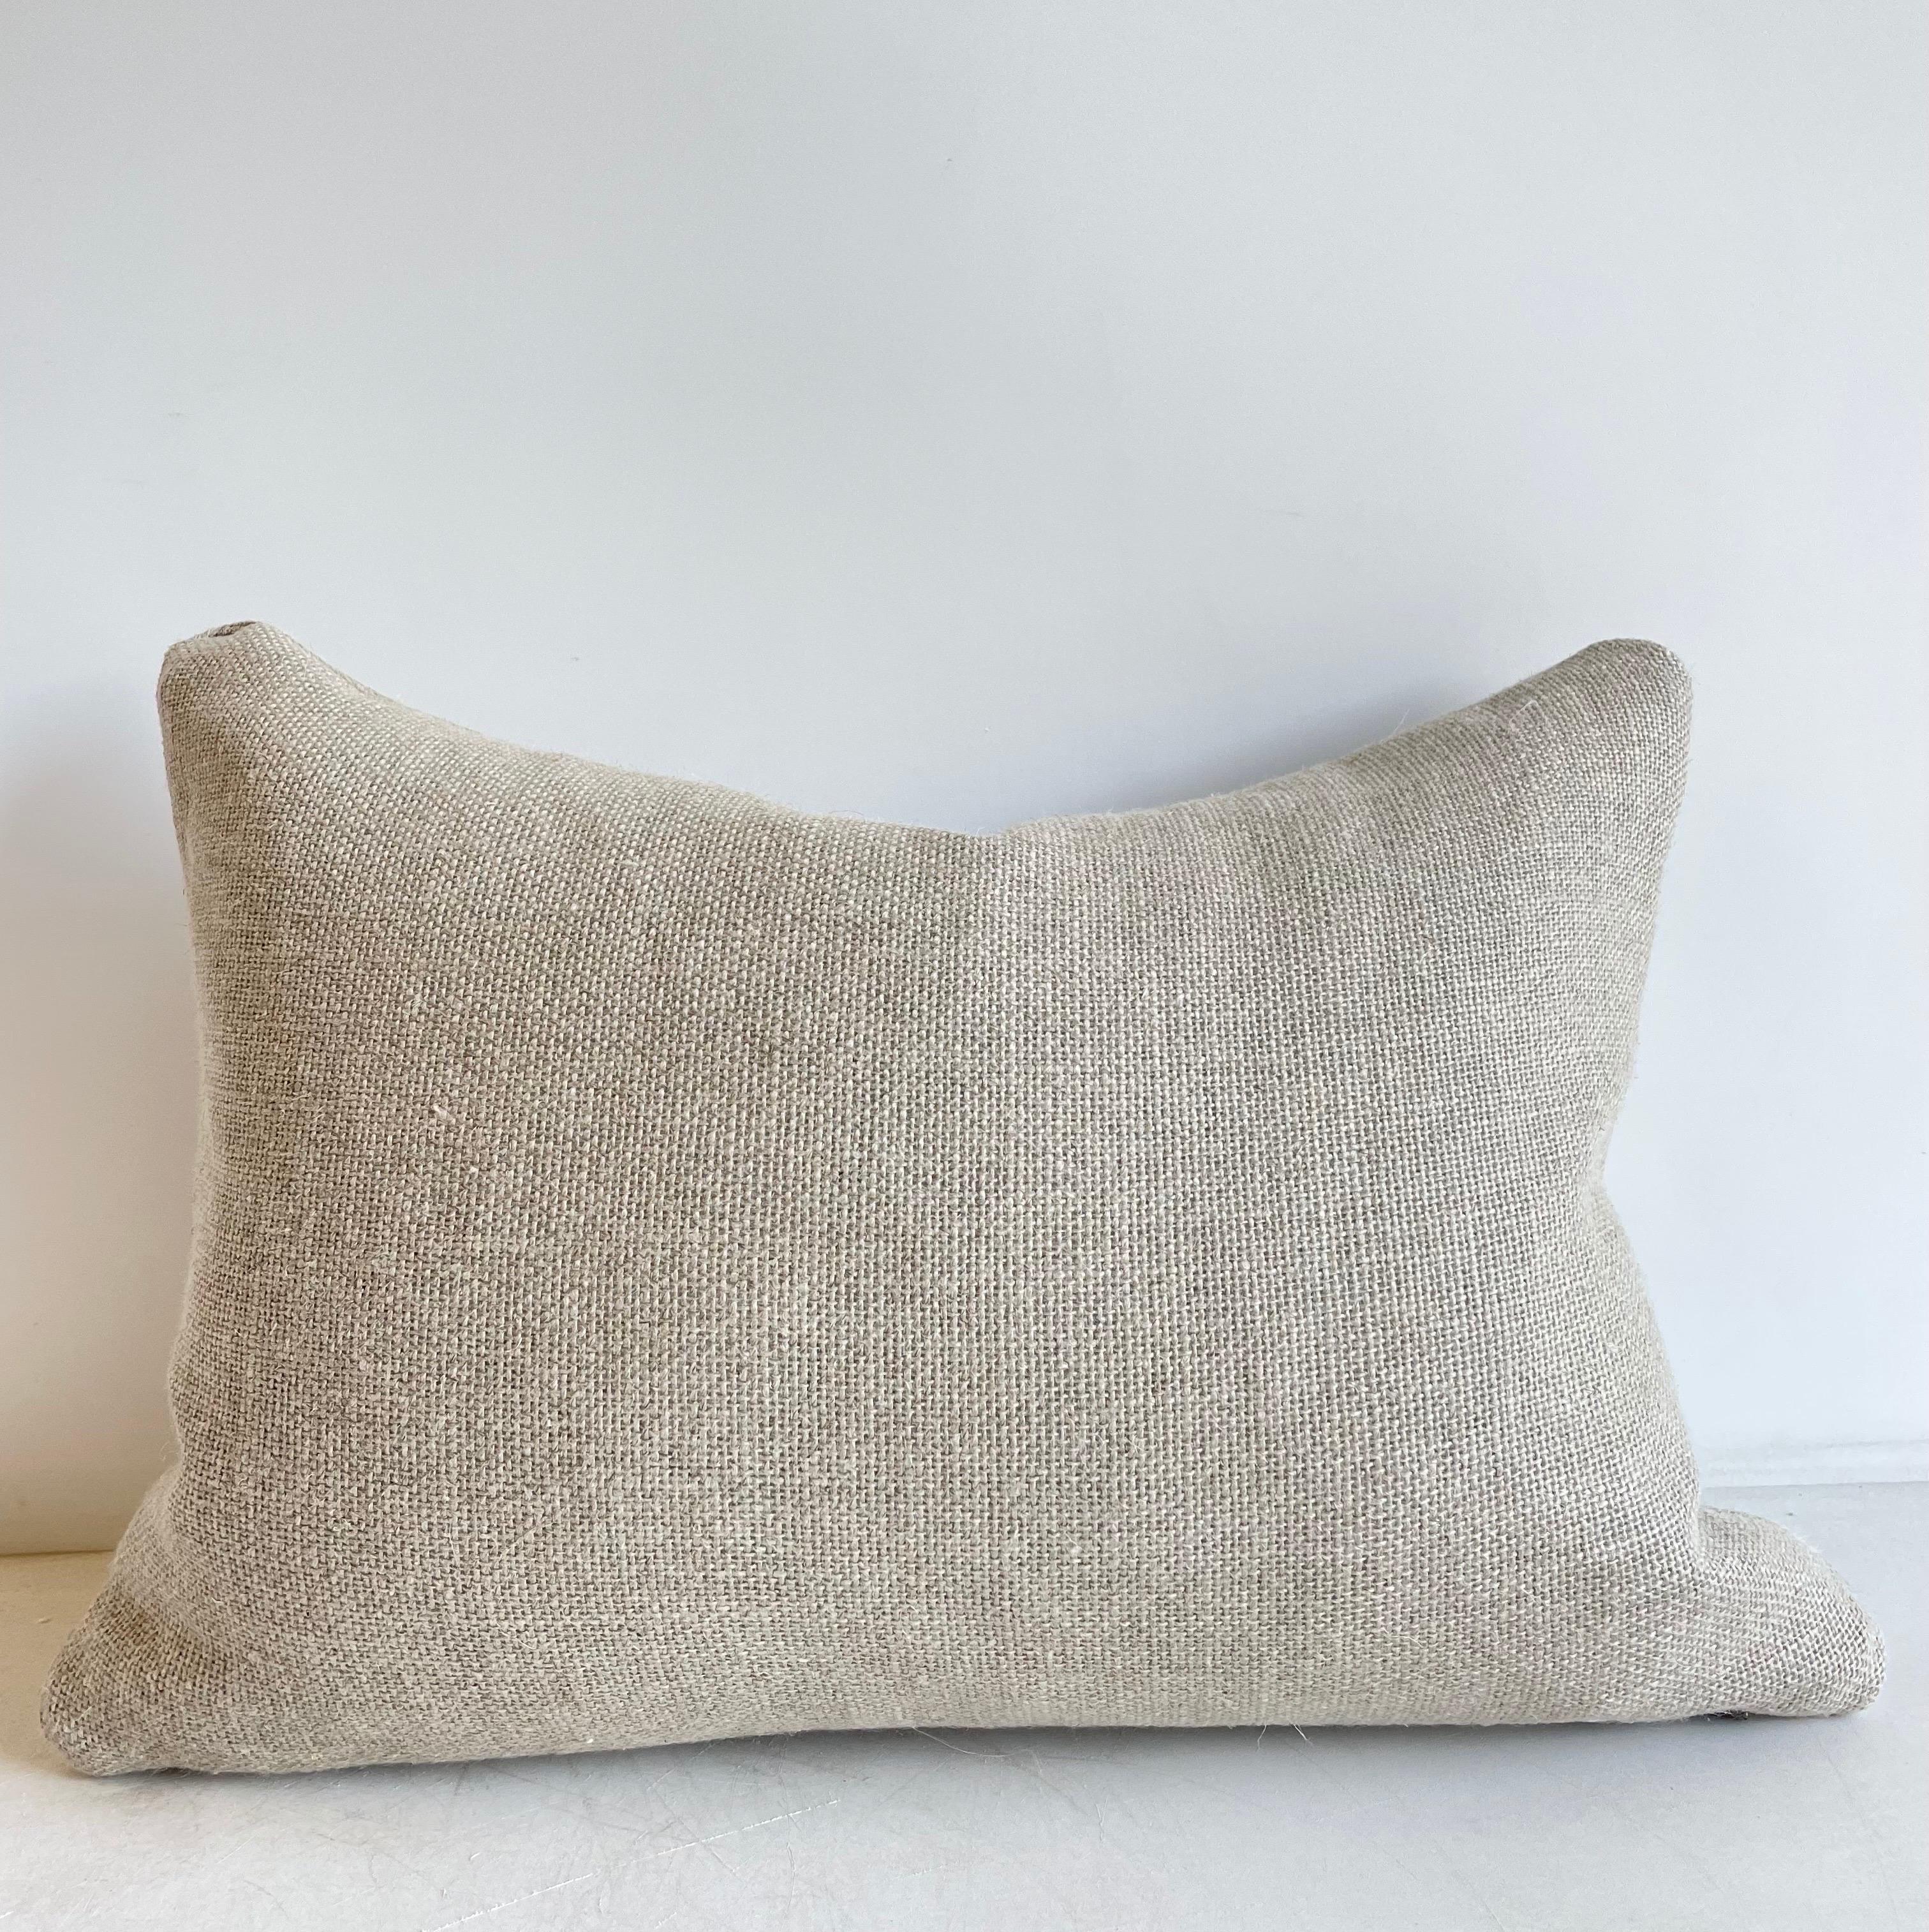 Grainsack pillows?
Lovely grain feed sack pillows from Europe. We custom-made these out of the original antique feed sacks, with brass zipper closure and overlocked edges. The fronts are original woven linen and hemp, some of them will have